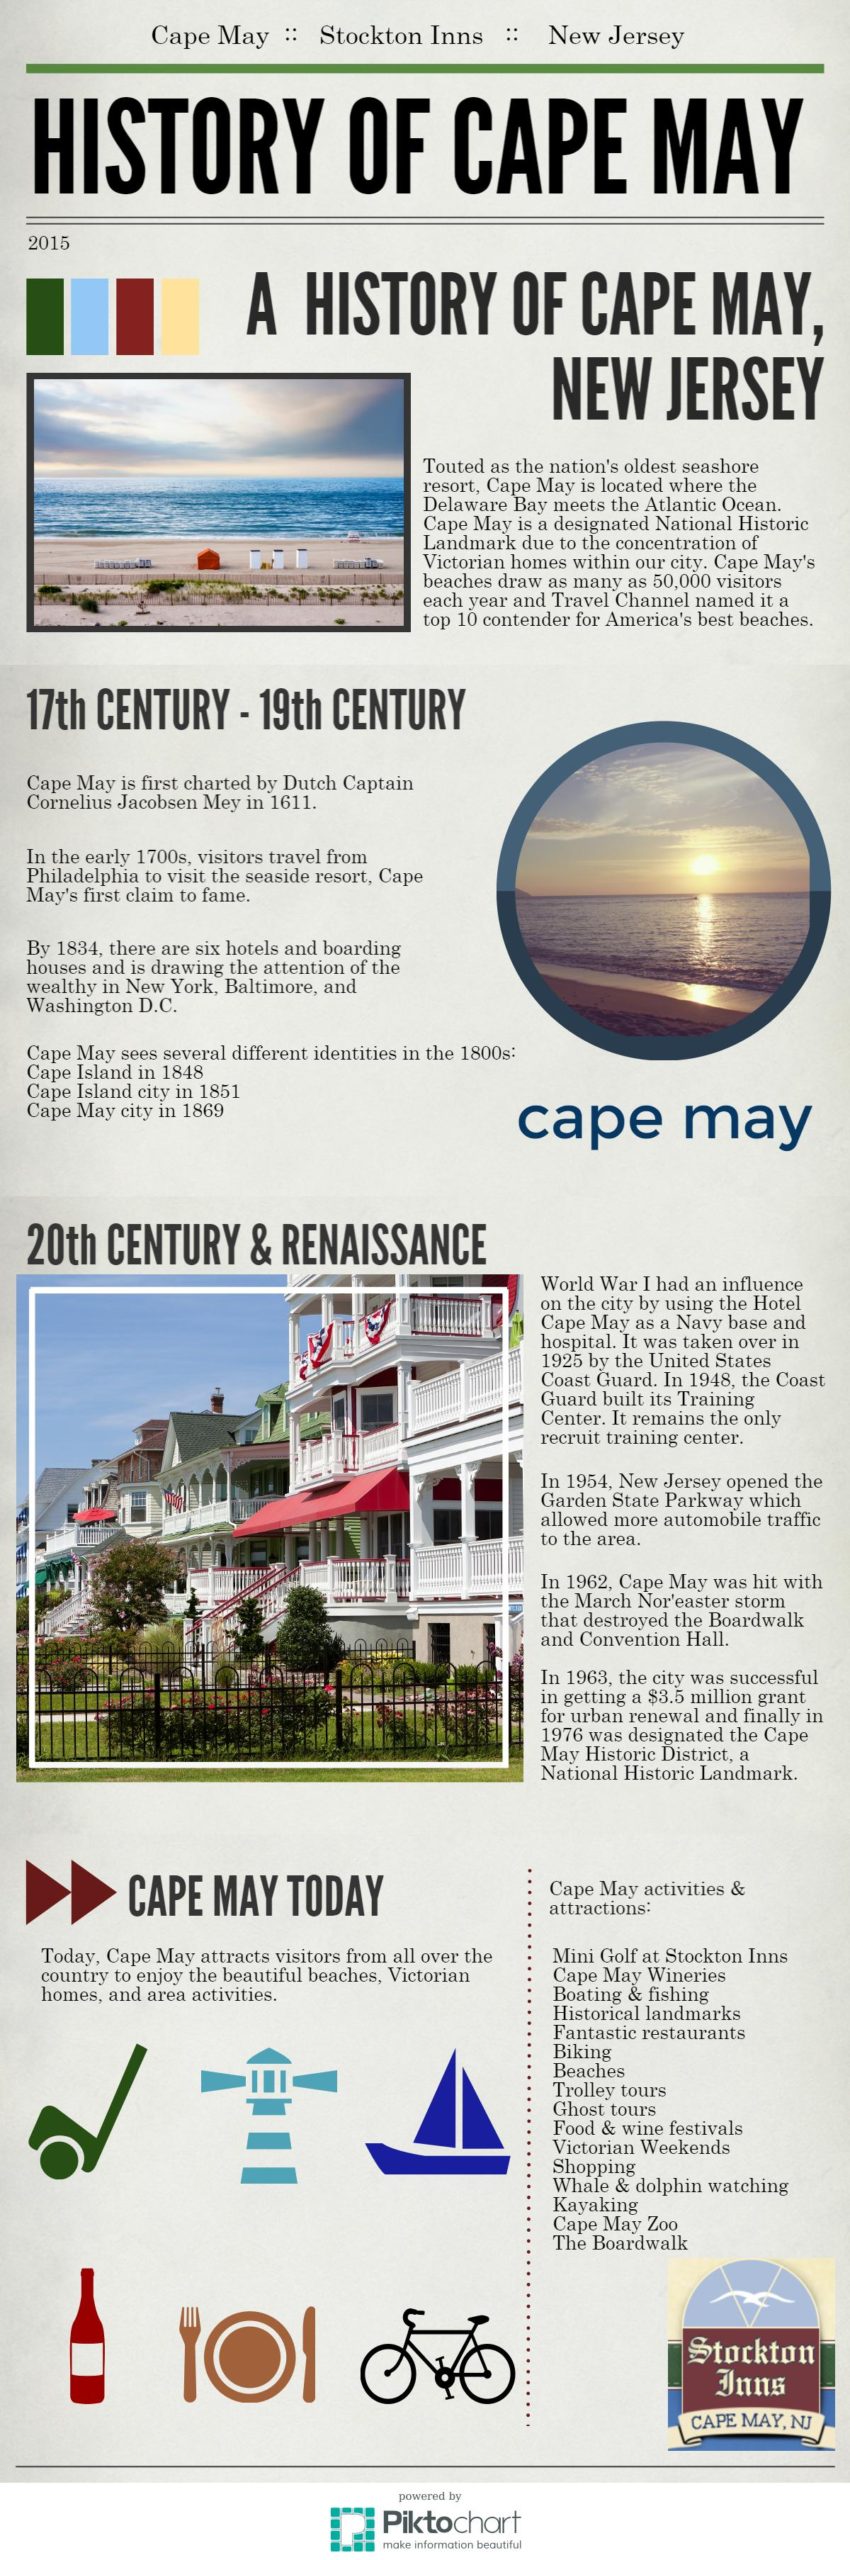 Image a newspaper clipping that says the history of cape may with some information on the history of cape may and some info on modern cape may